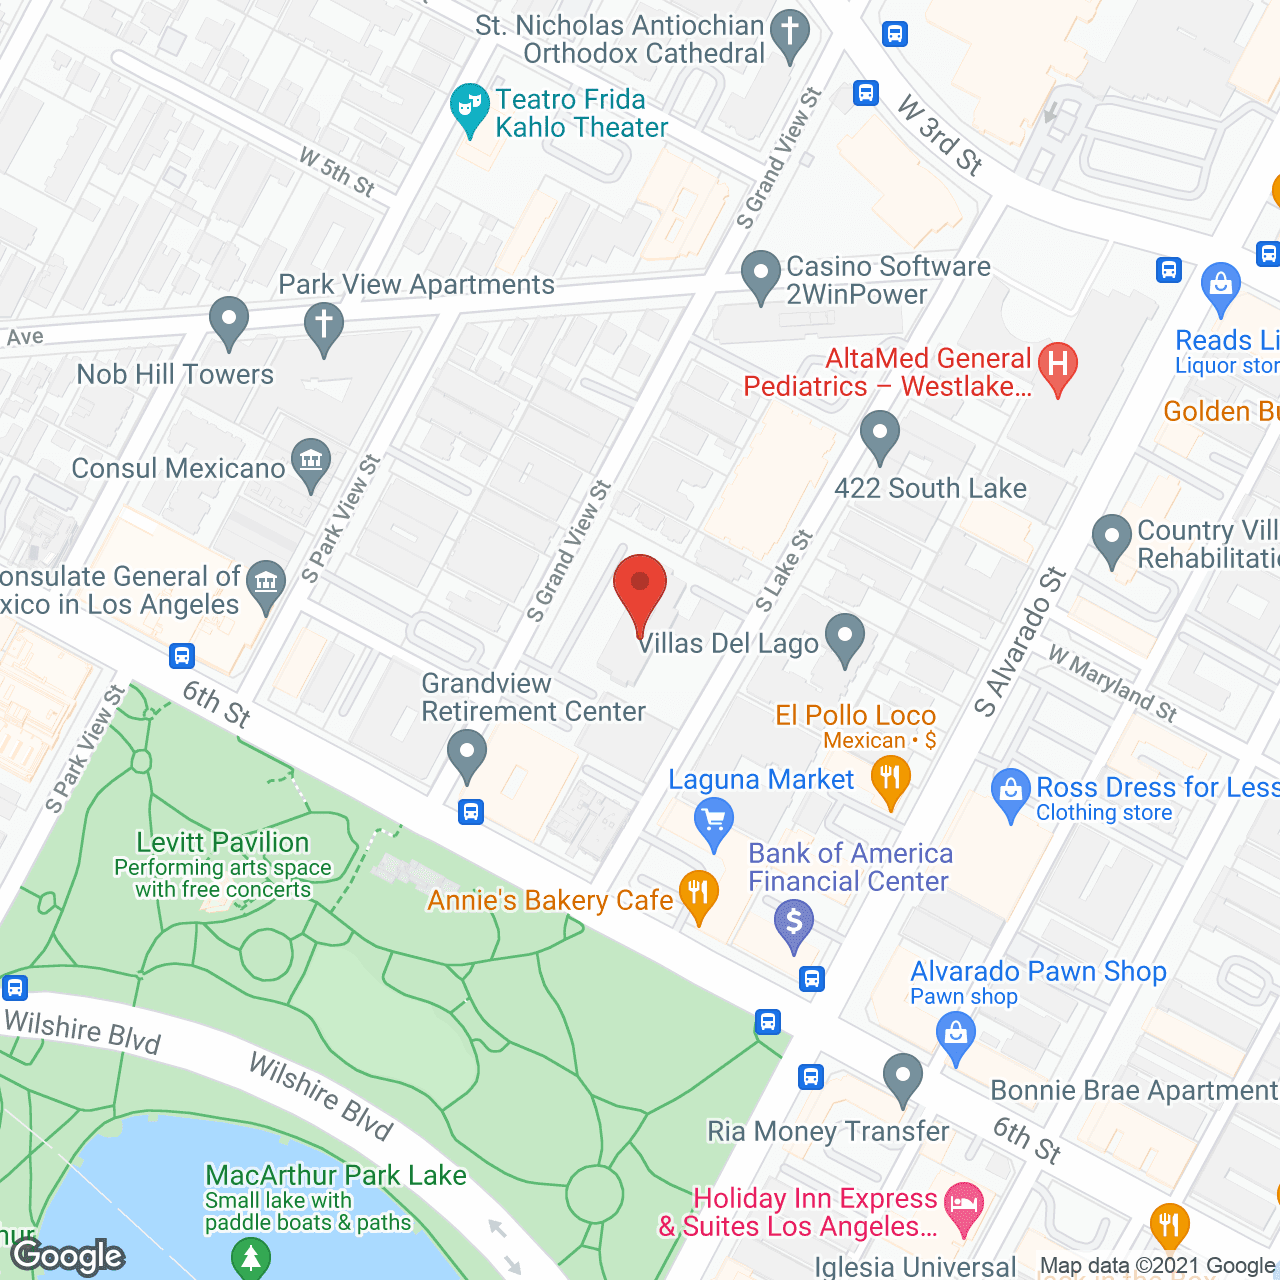 MacArthur Park Towers in google map